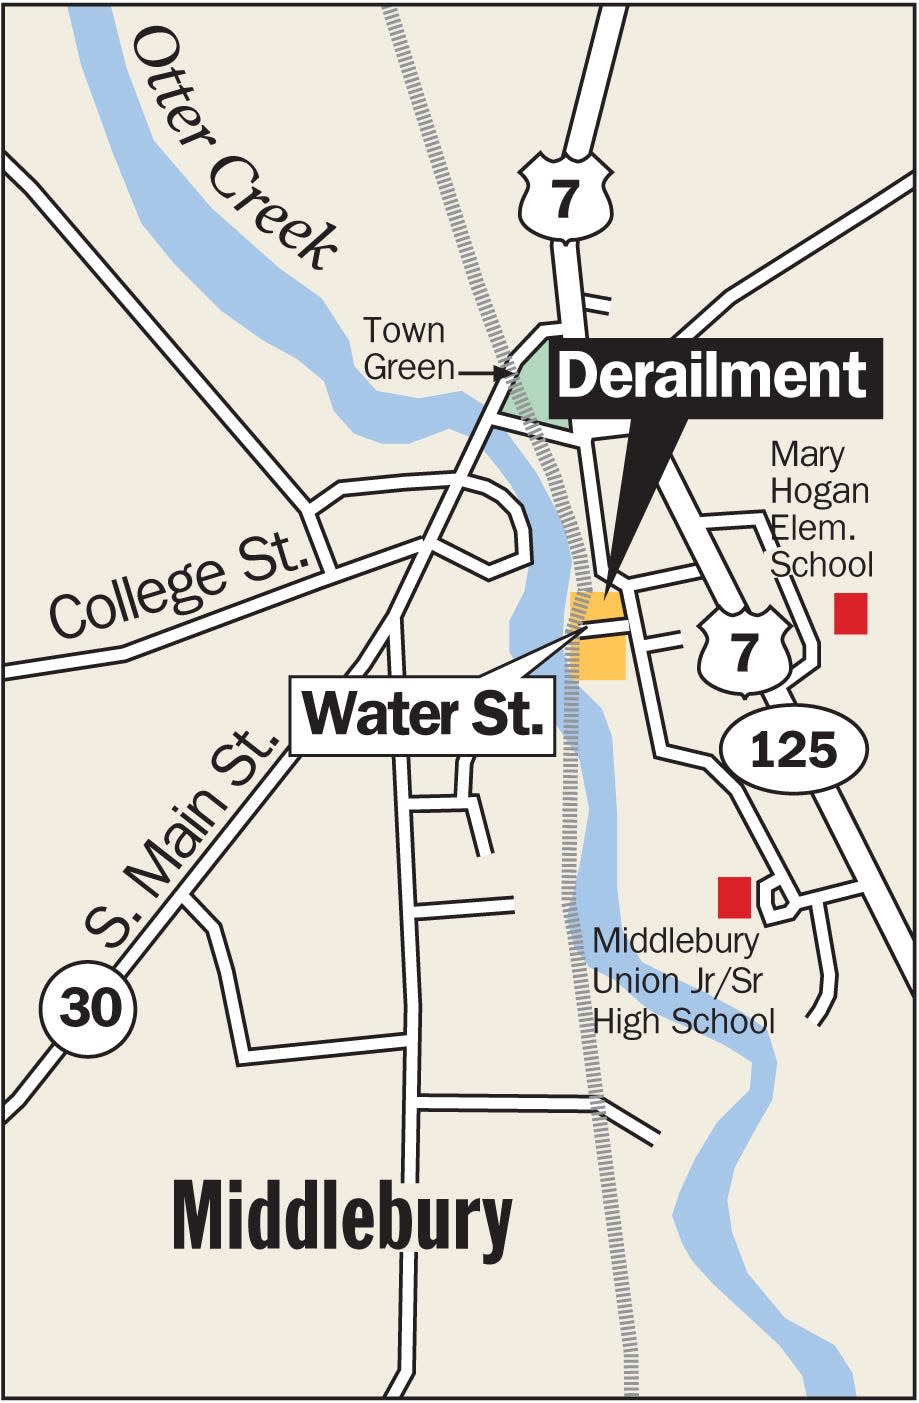 A map showing the site of a train derailment in Middlebury in 2007.